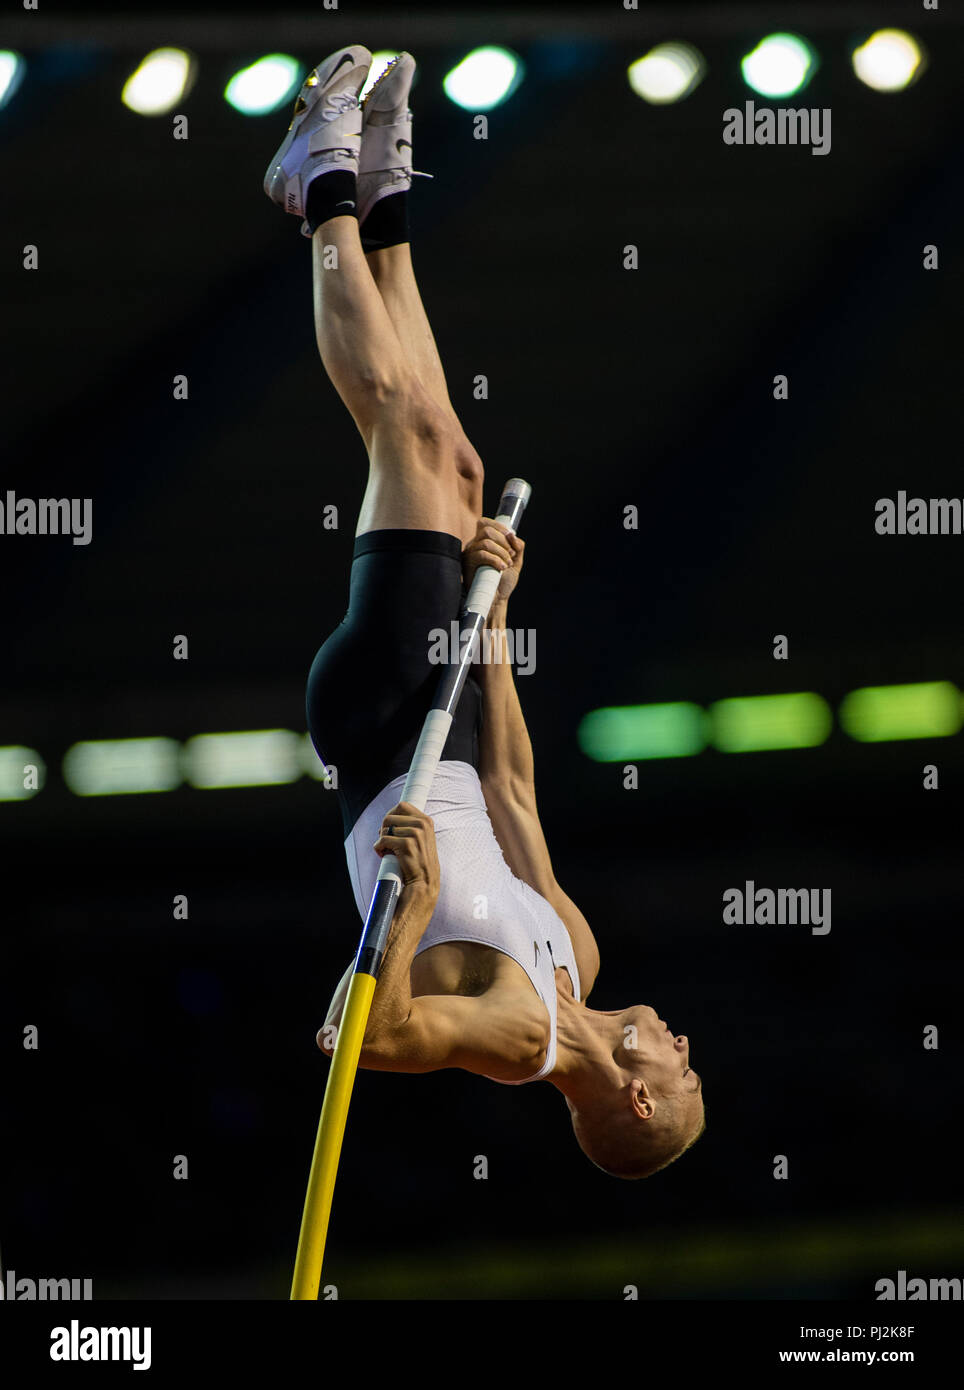 BRUSSELS - BELGIUM, 31 AUG 18. Sam Kendricks of the USA competing in the Men's Pole Vault at the IAAF Diamond League ( AG Memorial Van Damme )Brussels Stock Photo